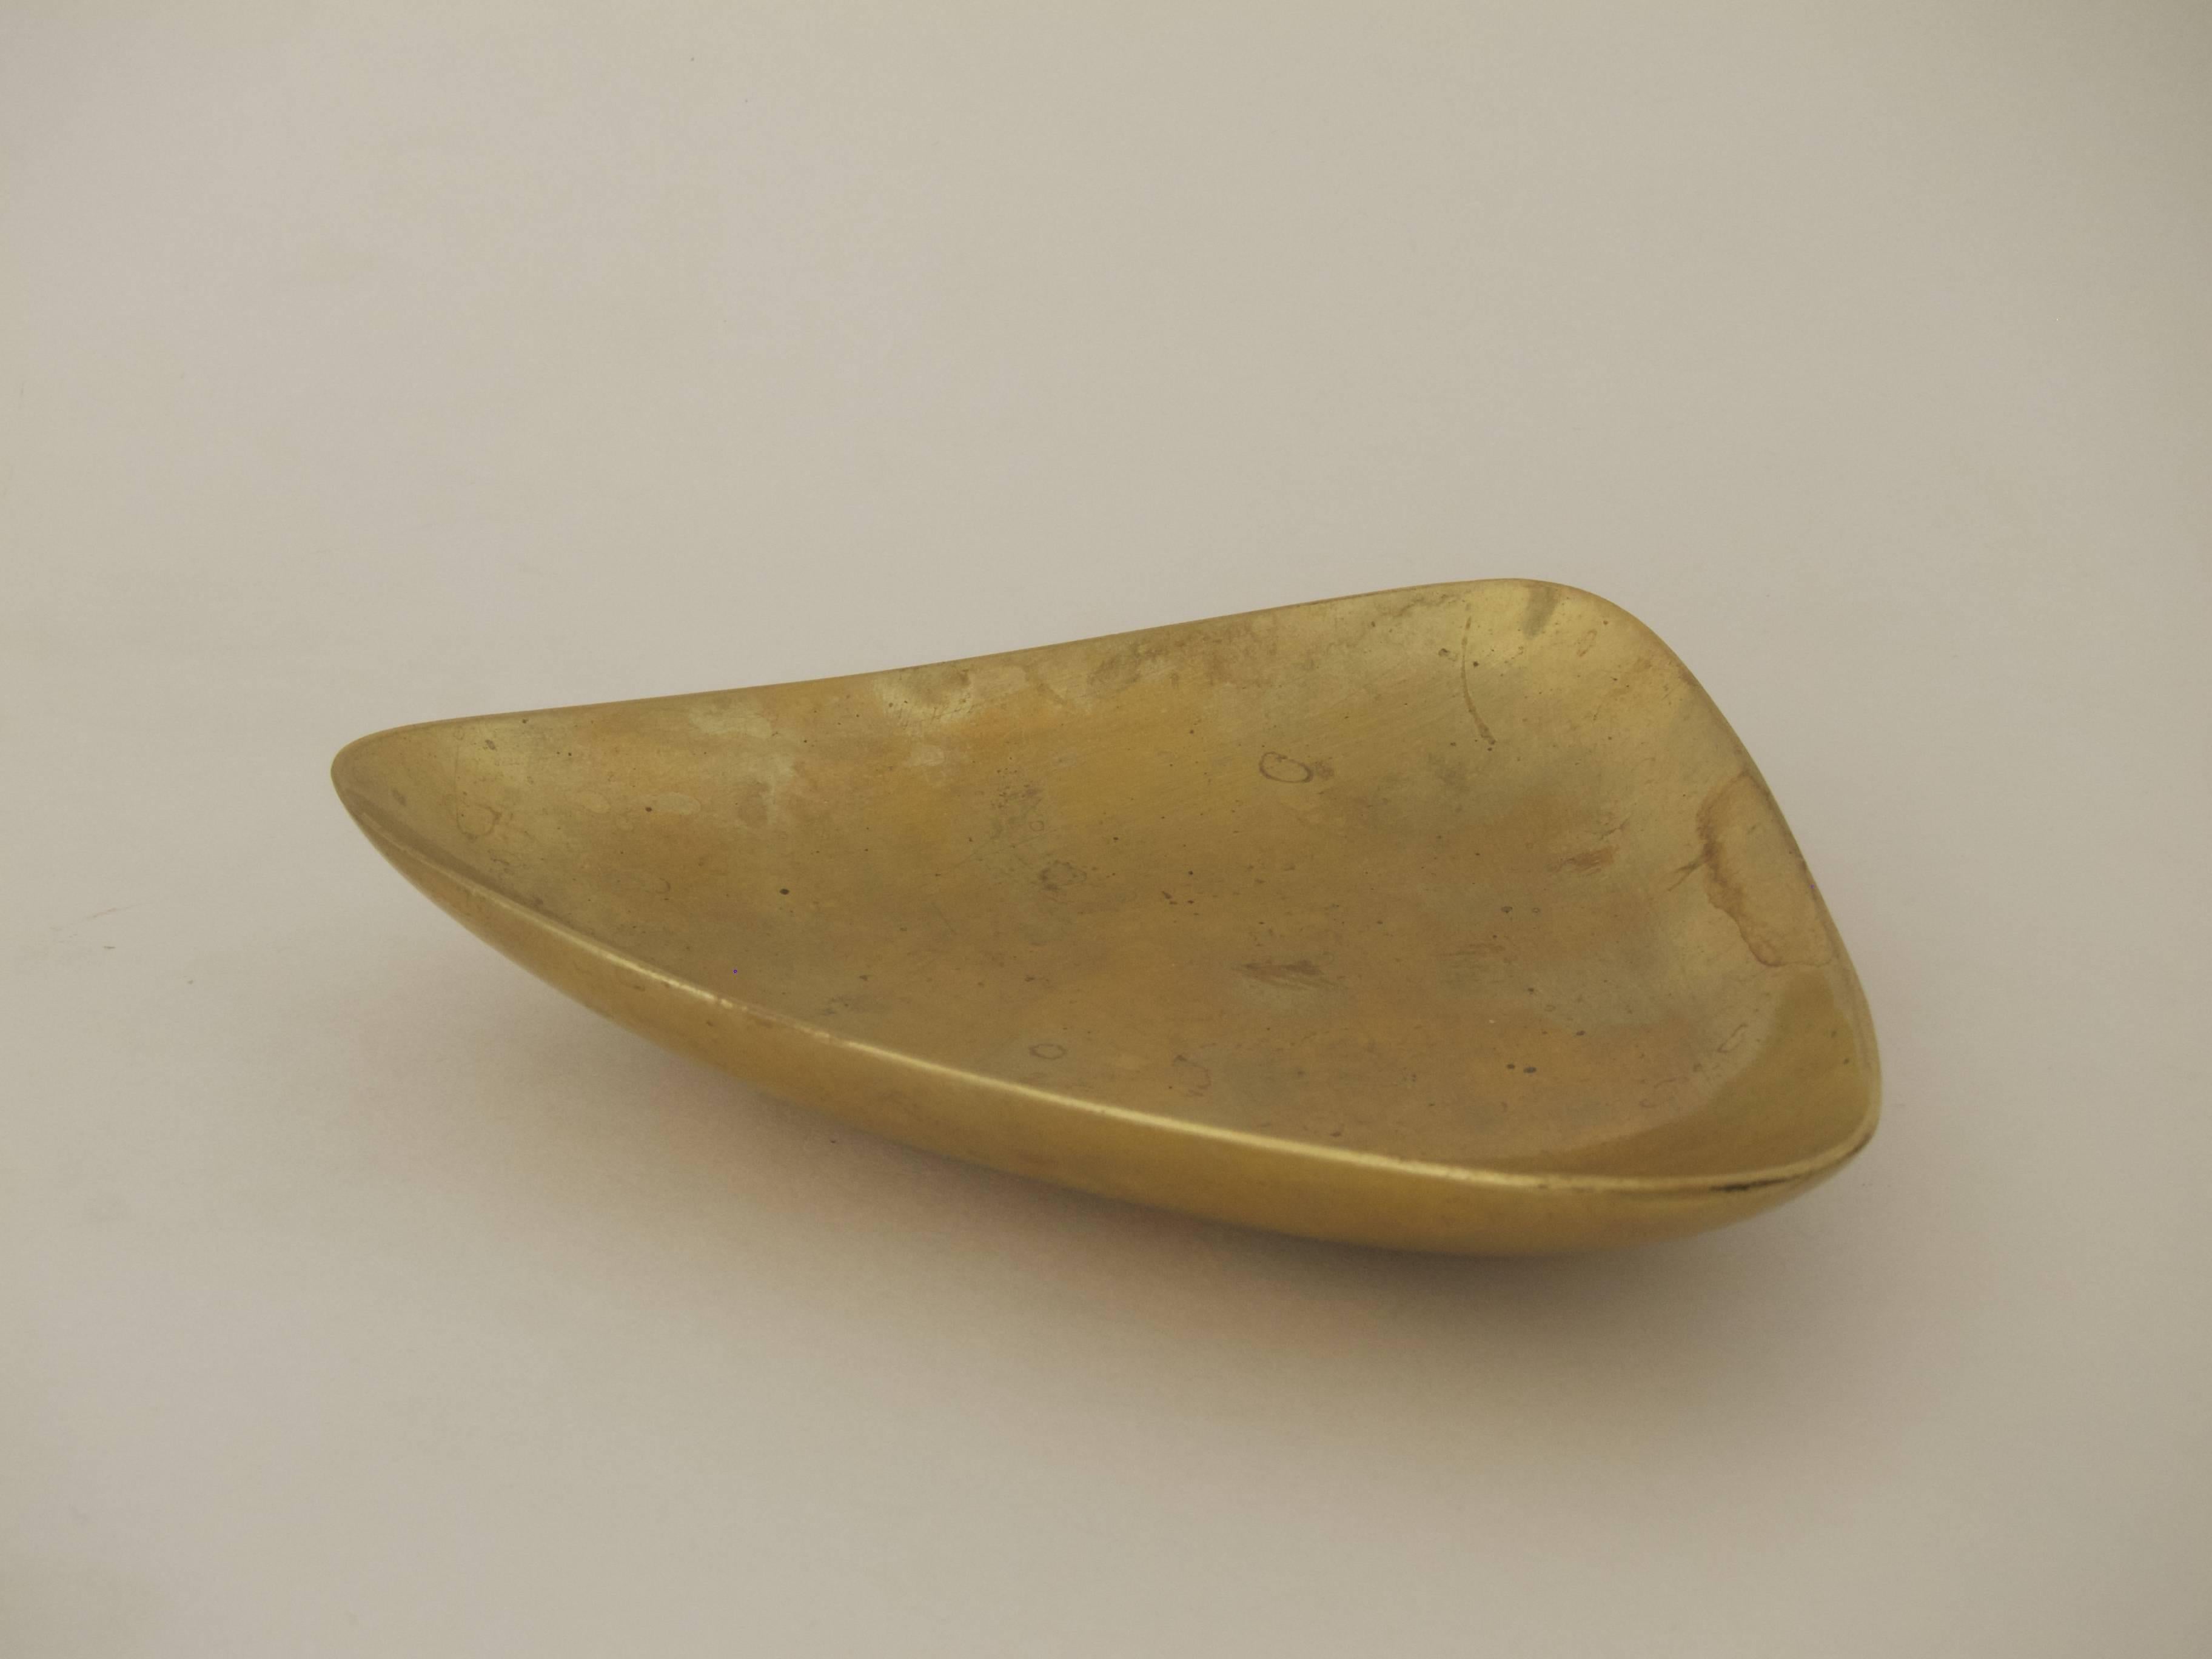 Small bowl by Carl Auböck,
1950s.
Brass.
Signed: Aubock logo, made in Austria.